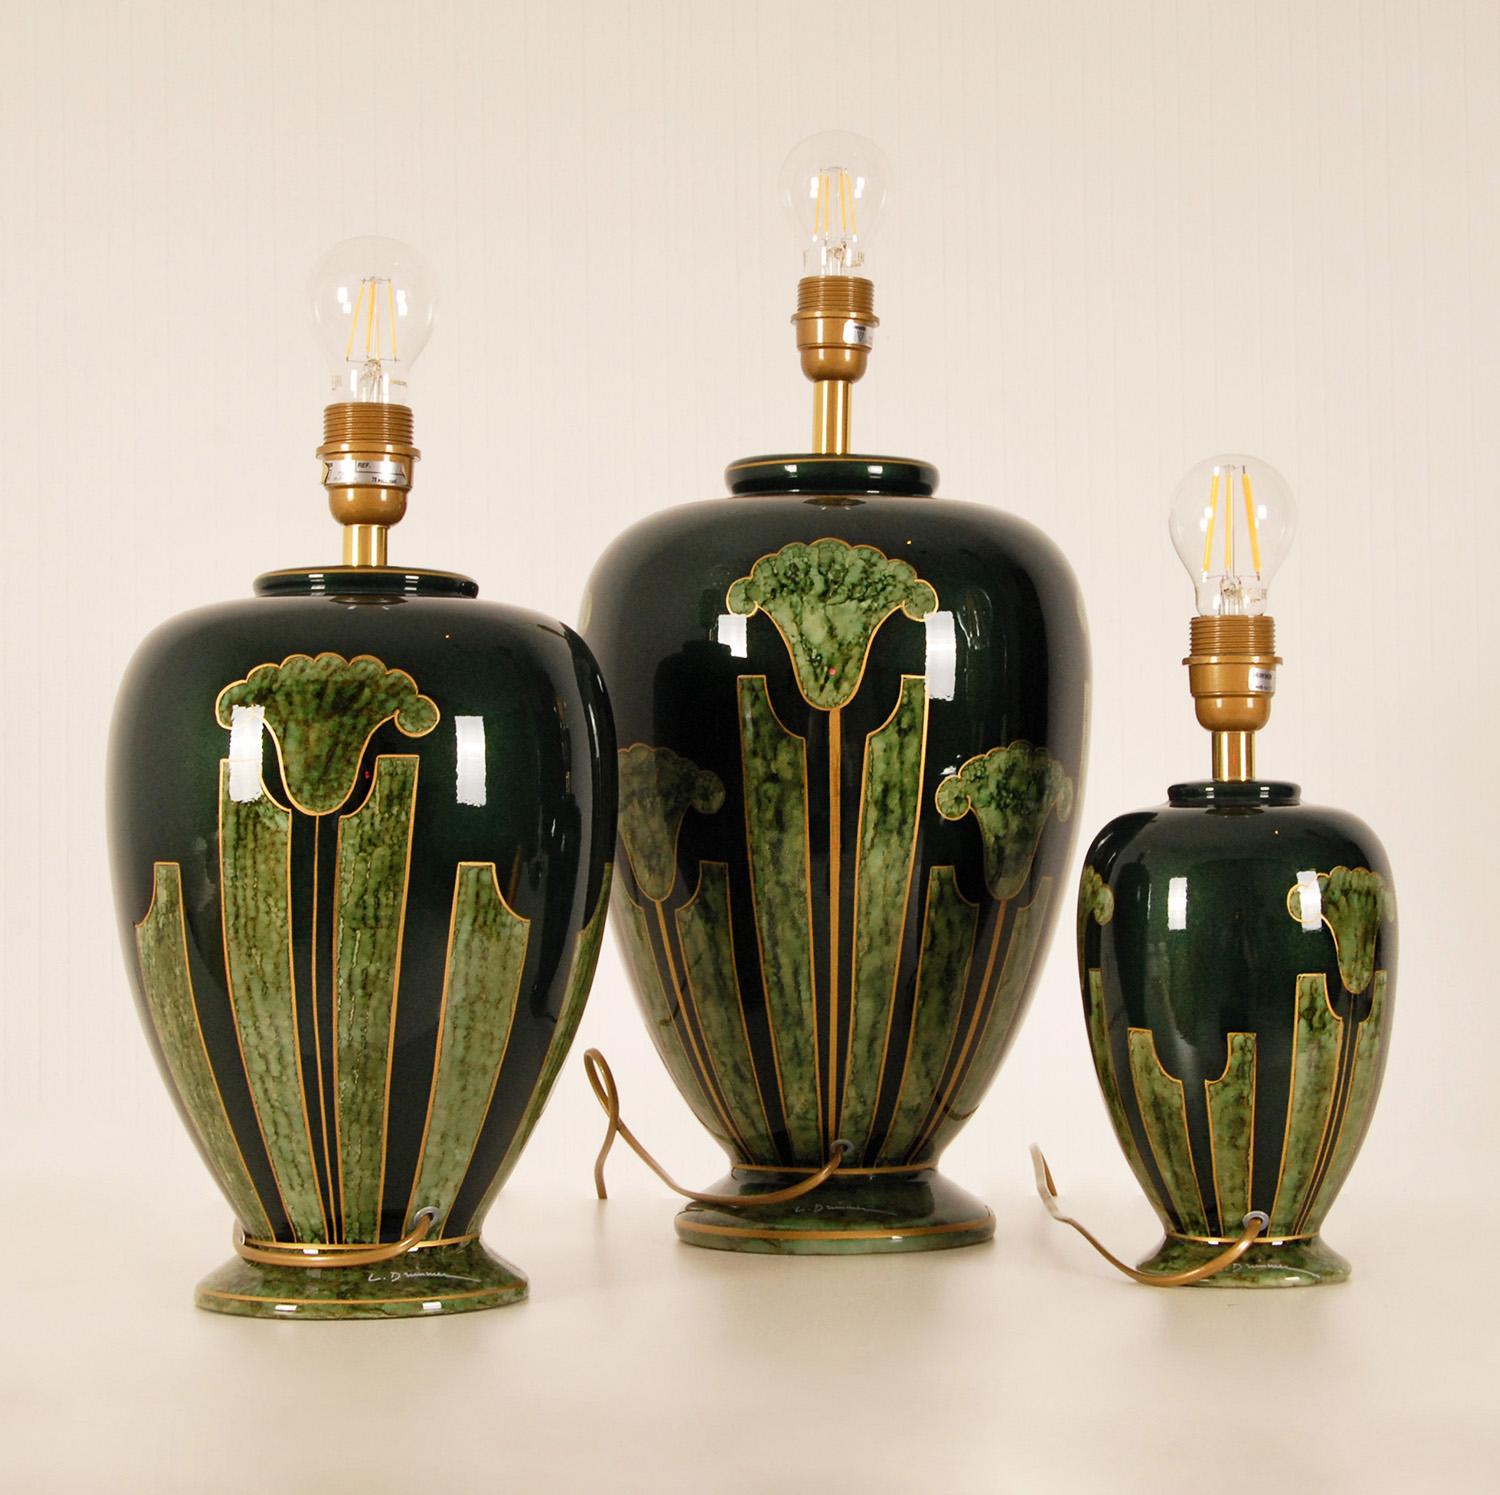 Vintage French Ceramic Green and Gold Table Lamps Marble Metallic, Set of 3 For Sale 1